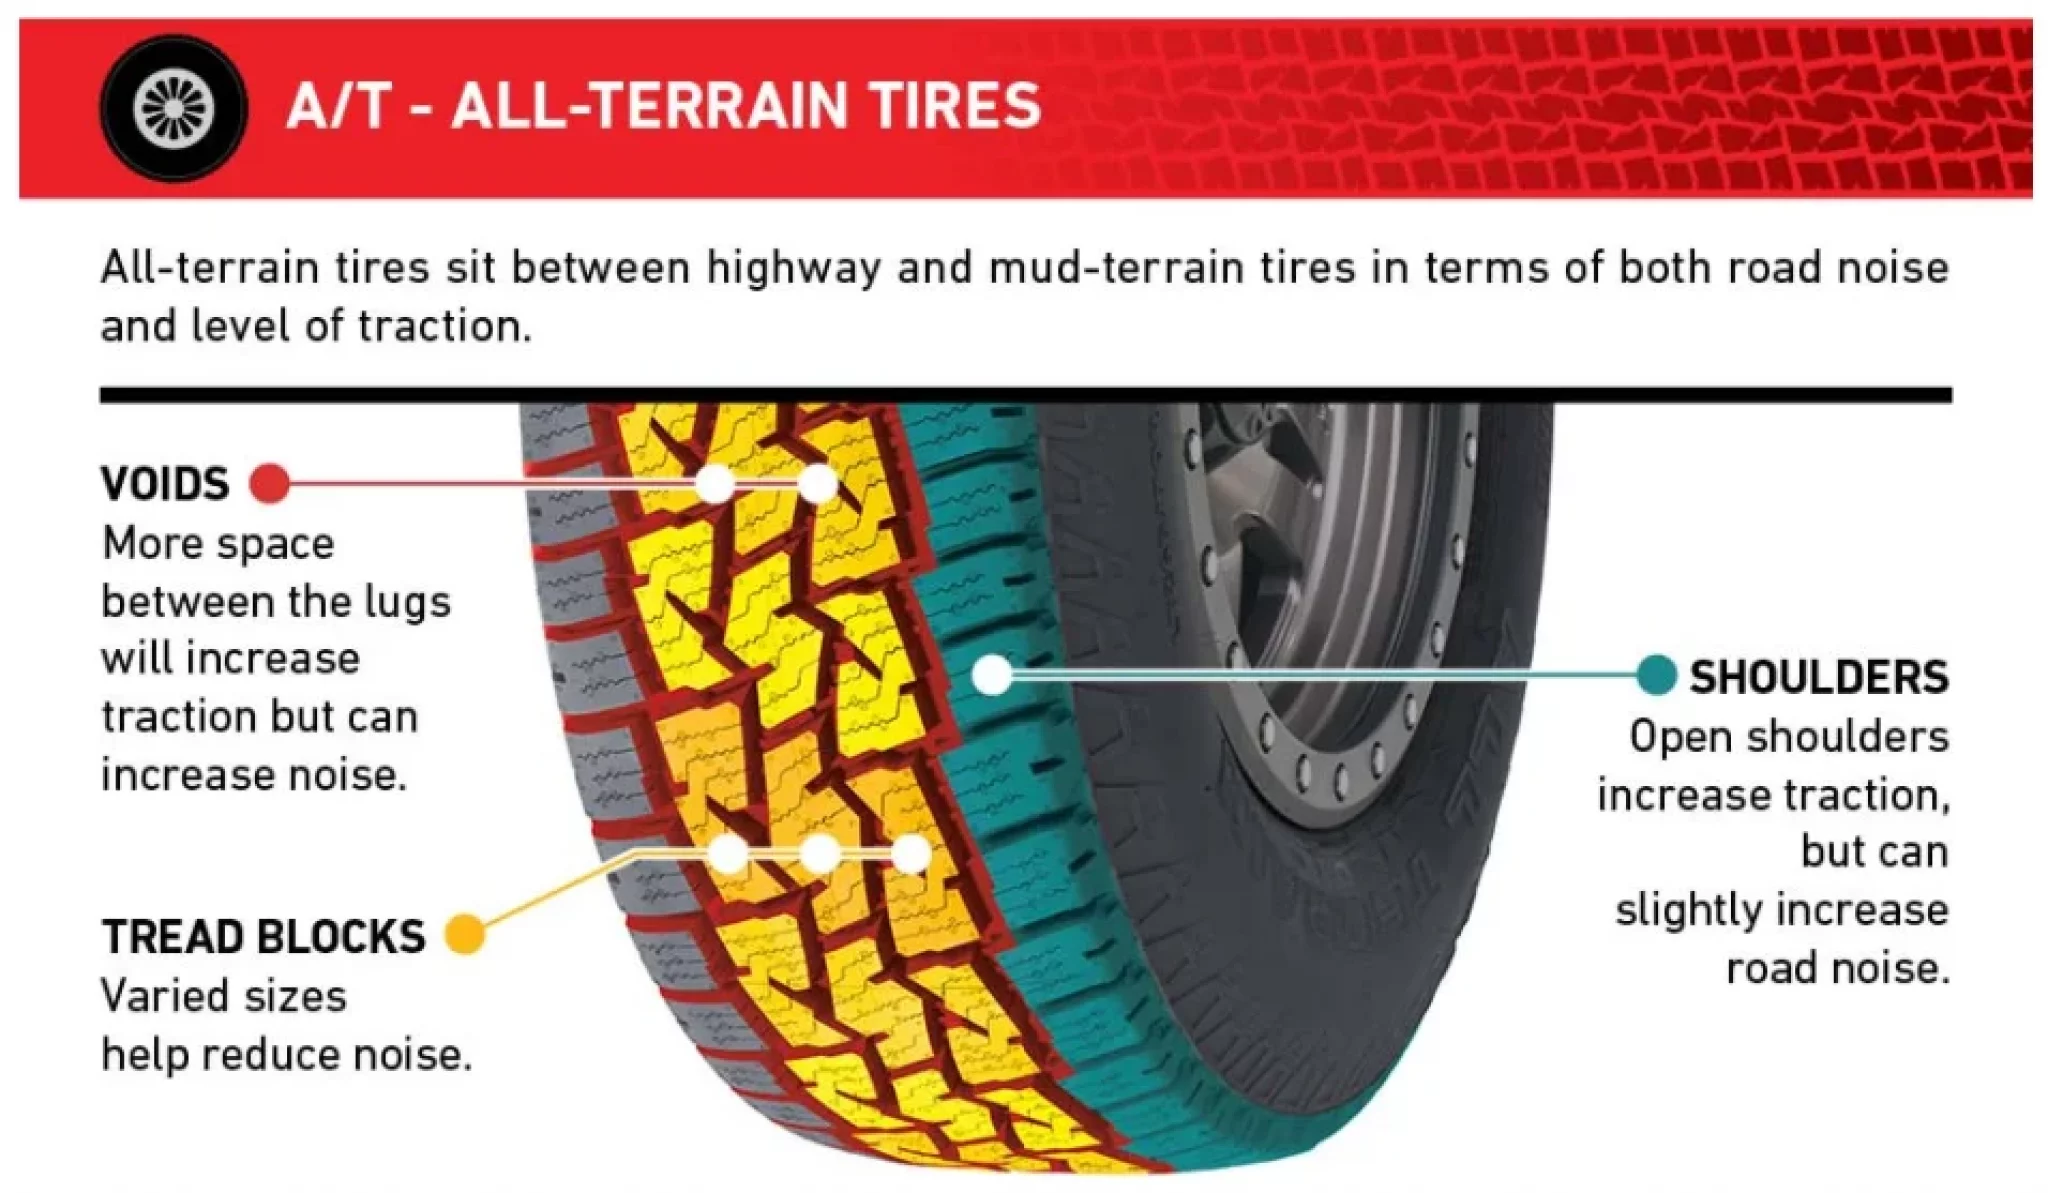 What are all terrain tires good for